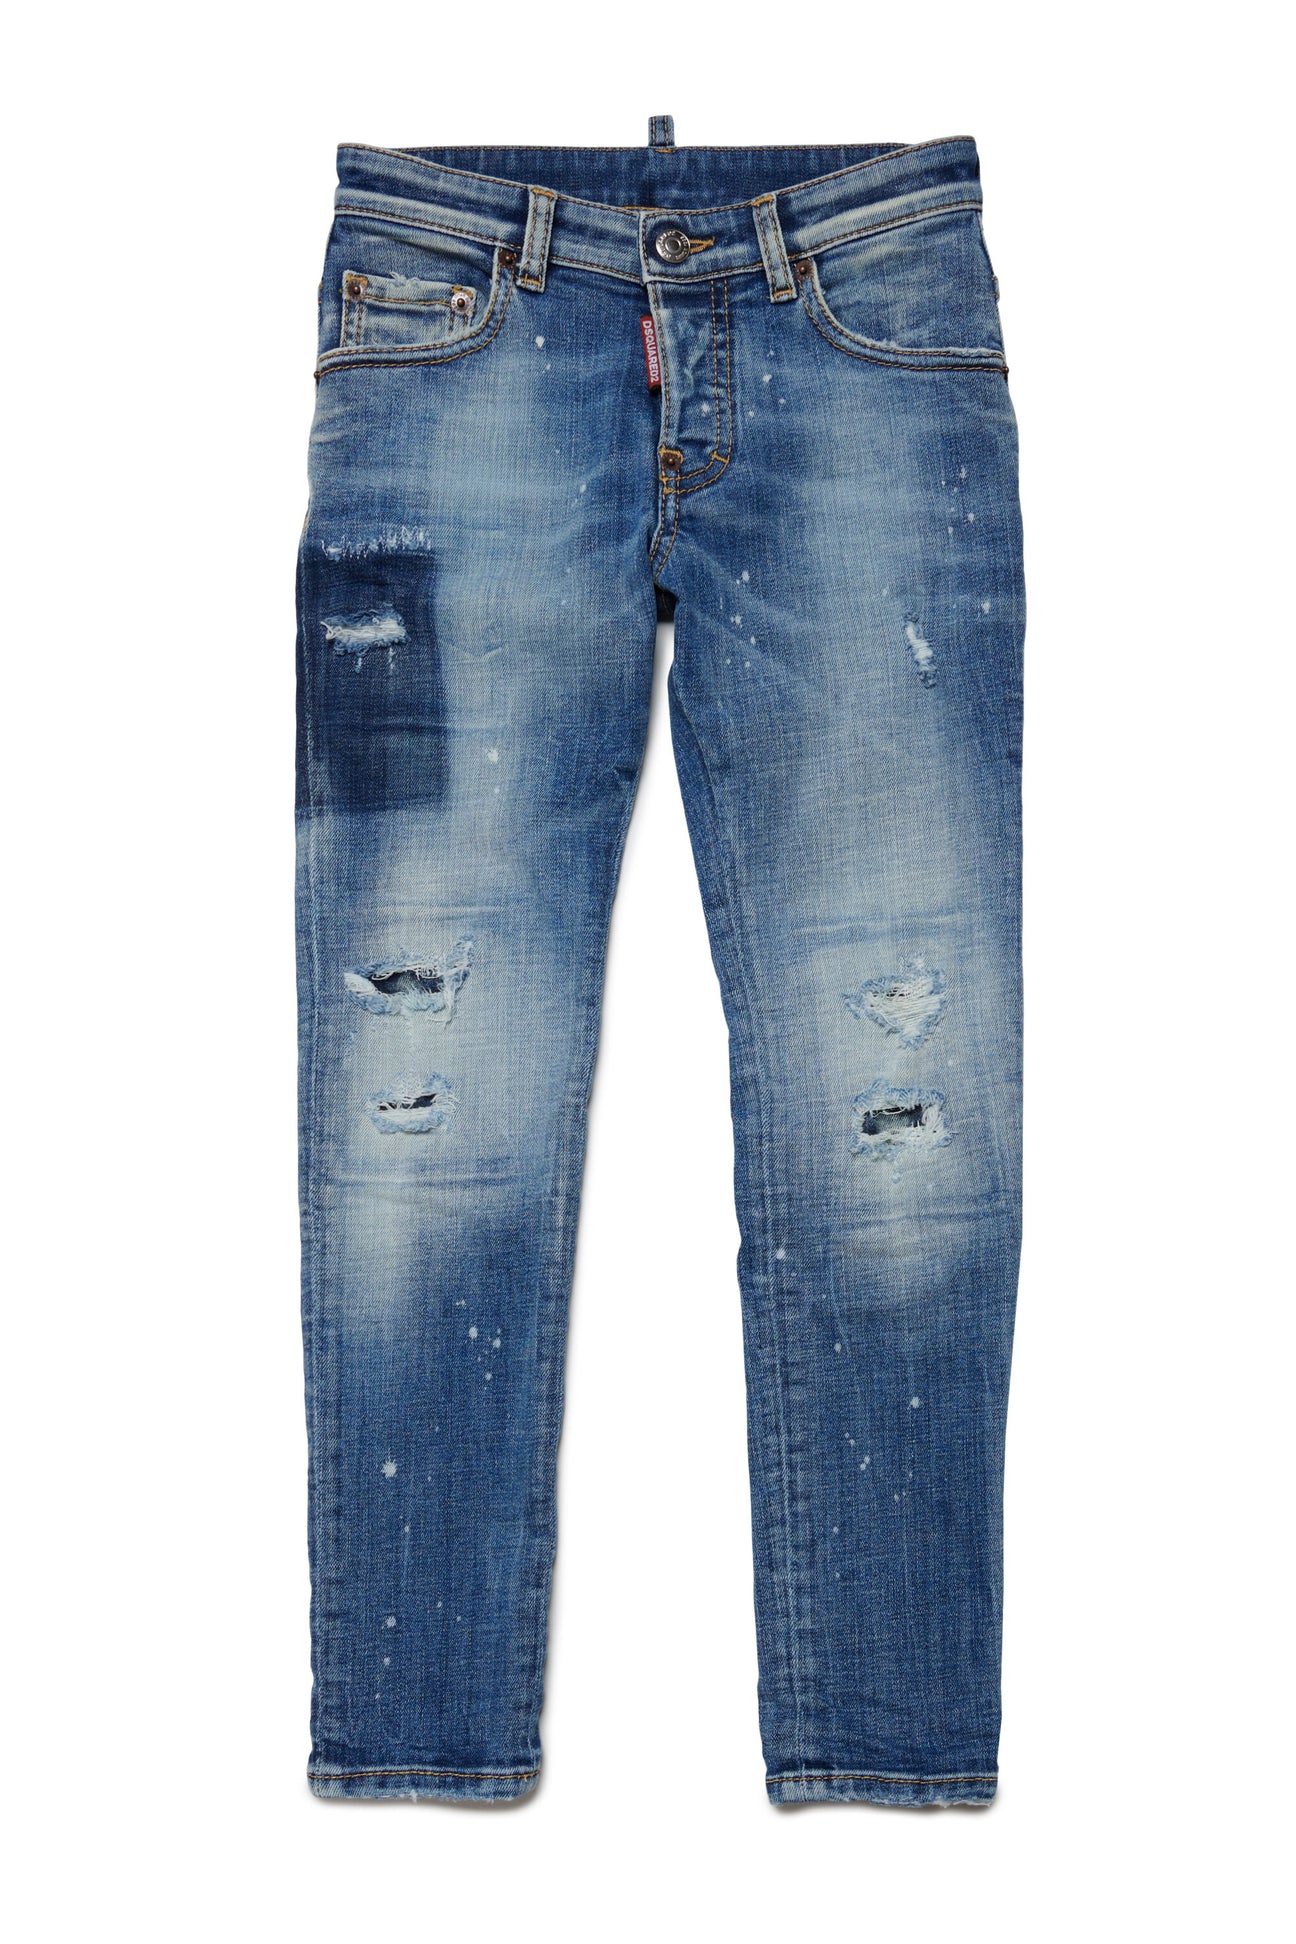 Shaded blue skinny jeans with breaks - Skater 